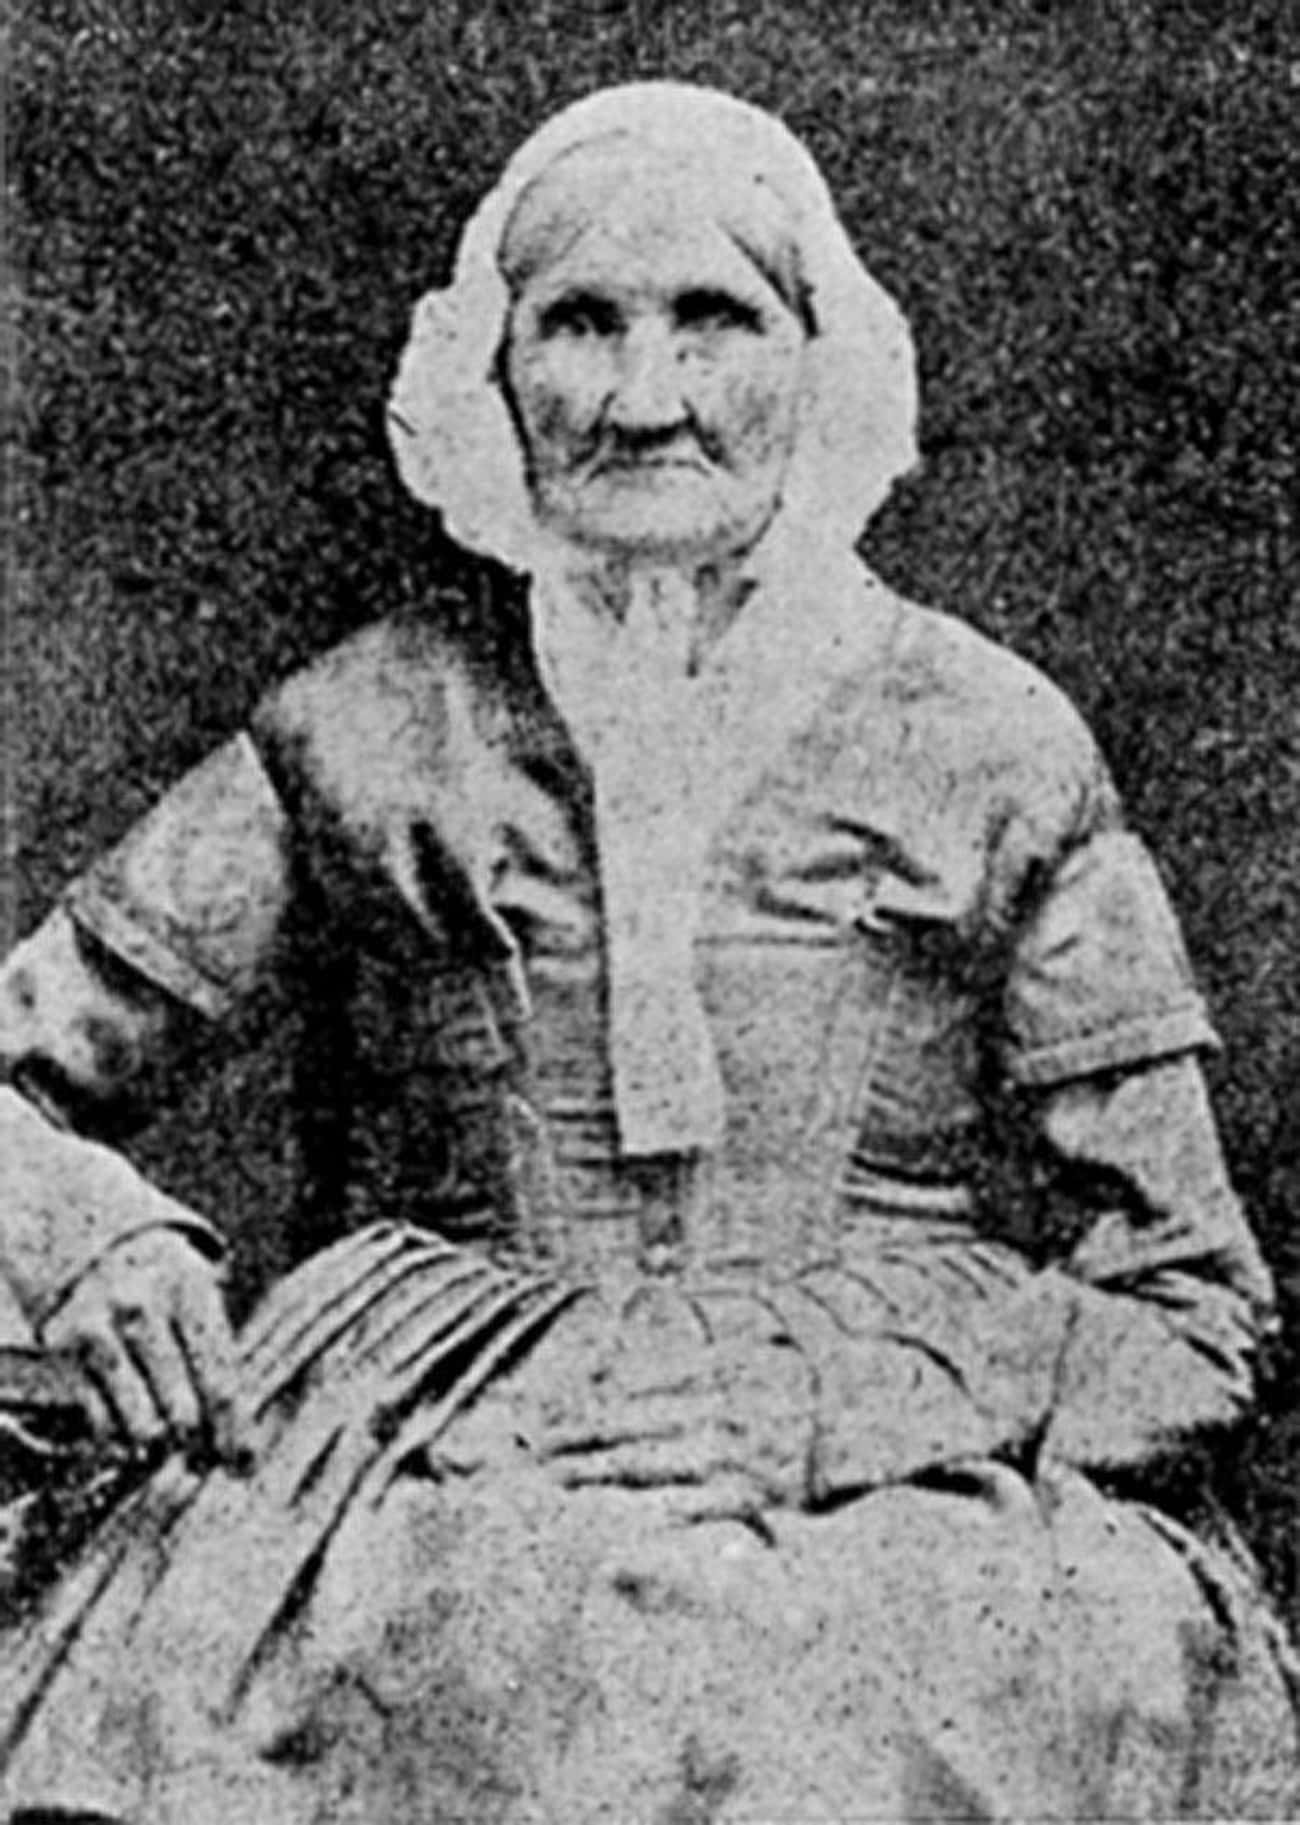 Hannah Stilley Gorby, Possibly The Oldest Person To Be Photographed, Born Around 1746, c. 1840